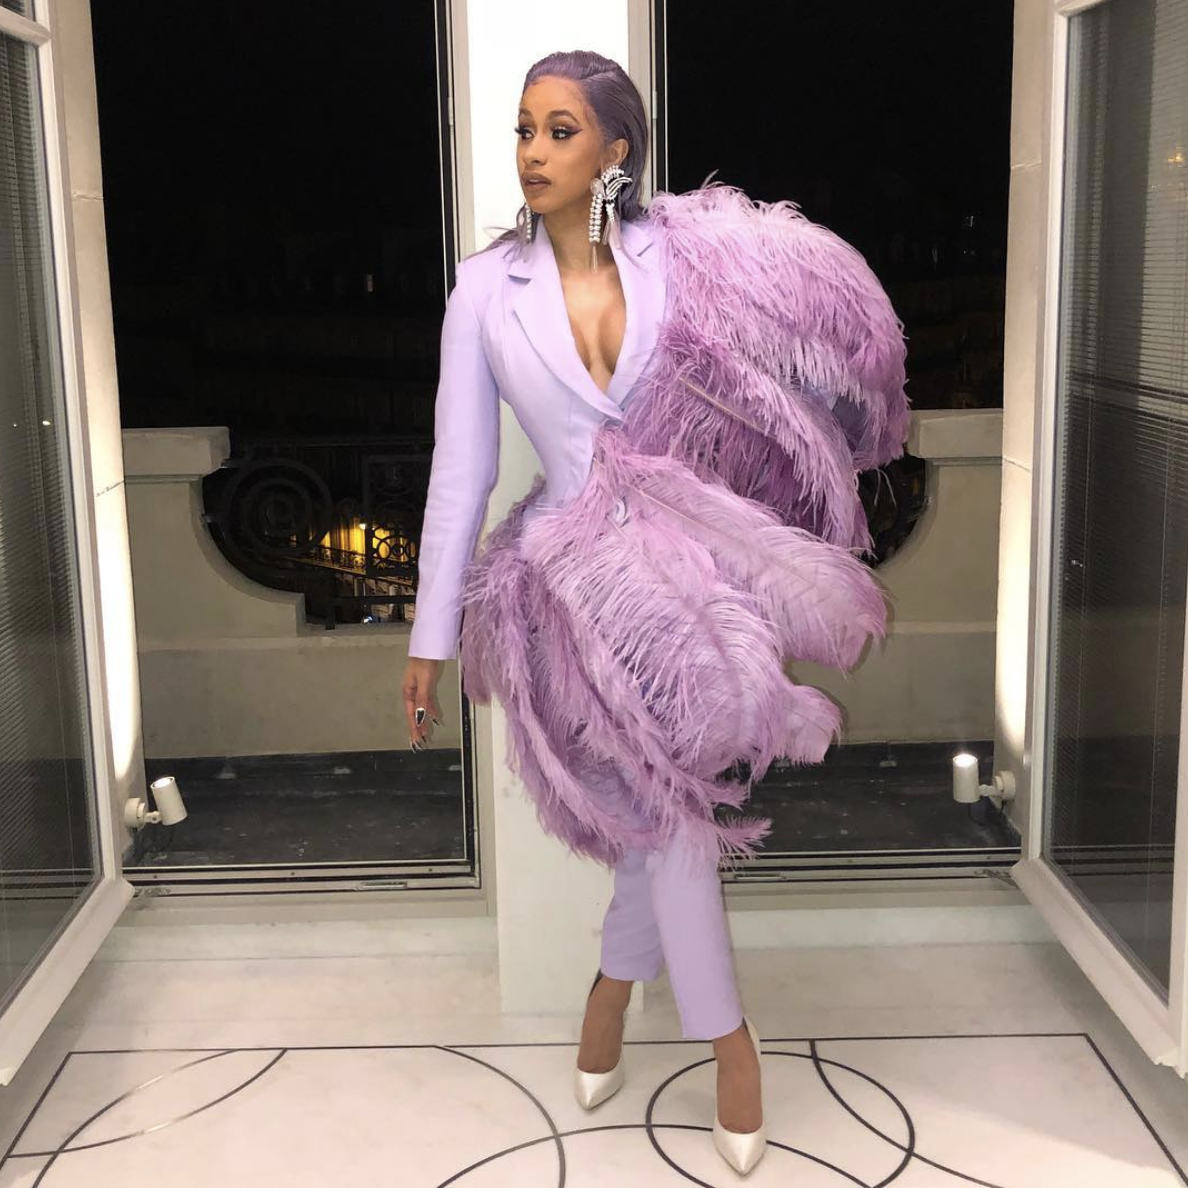 Cardi B looked absolutely stunning while leaving The Nice Guy Restaurant in  West Hollywood on Wednesday. The rapper donned a stylish whit